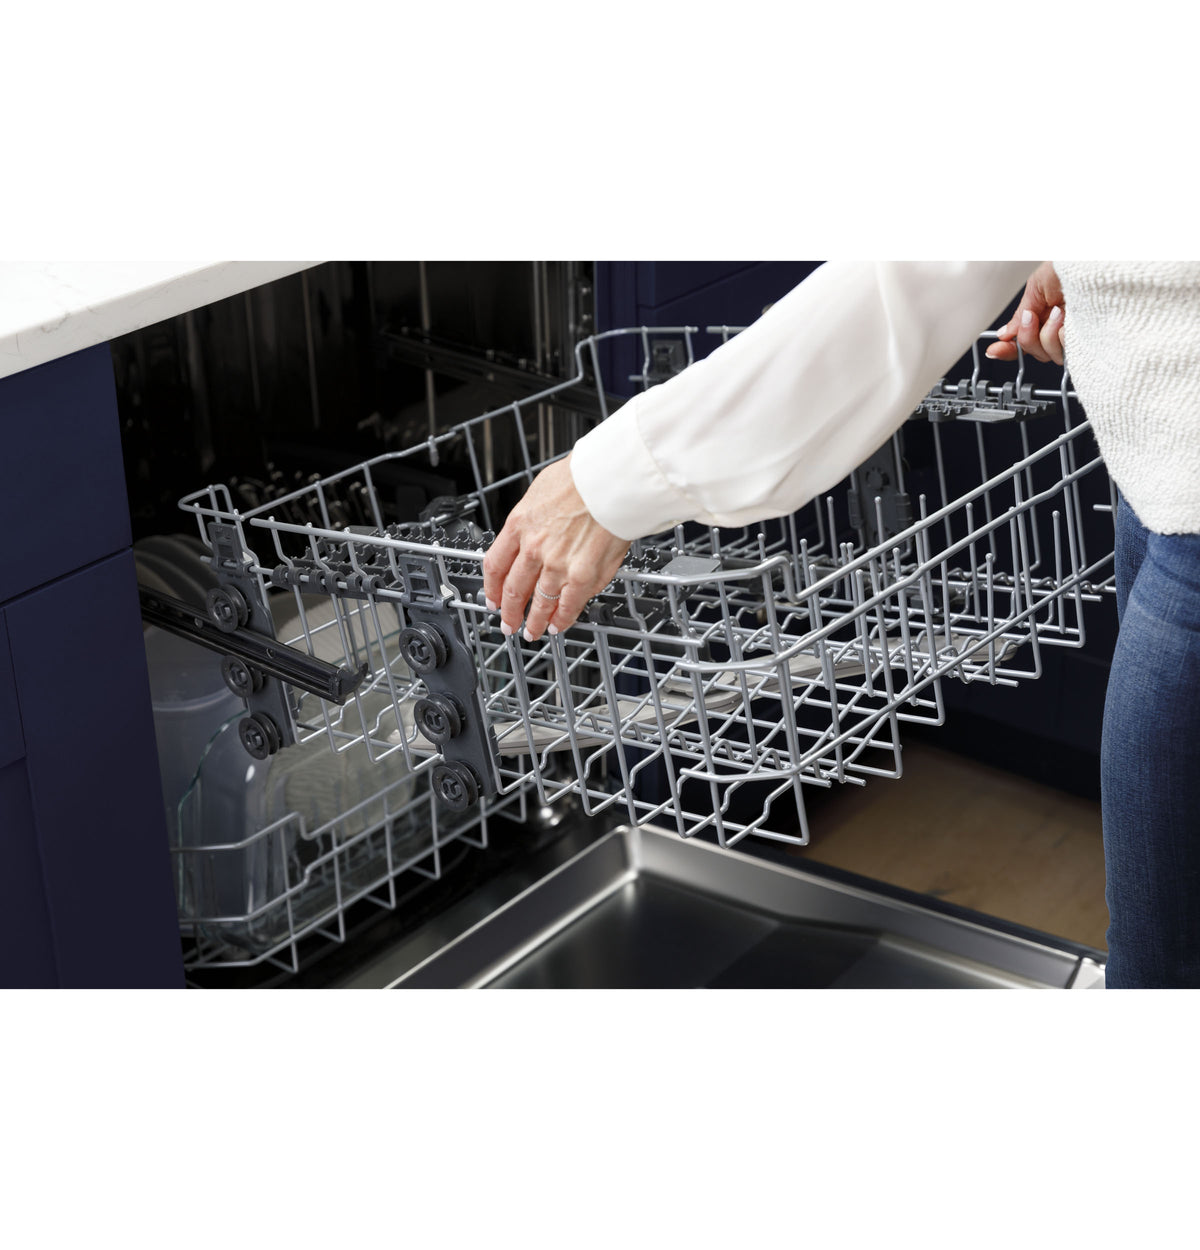 GE Profile™ ENERGY STAR® Fingerprint Resistant Top Control Stainless  Interior Dishwasher with Microban™ Antimicrobial Protection with Sanitize  Cycle